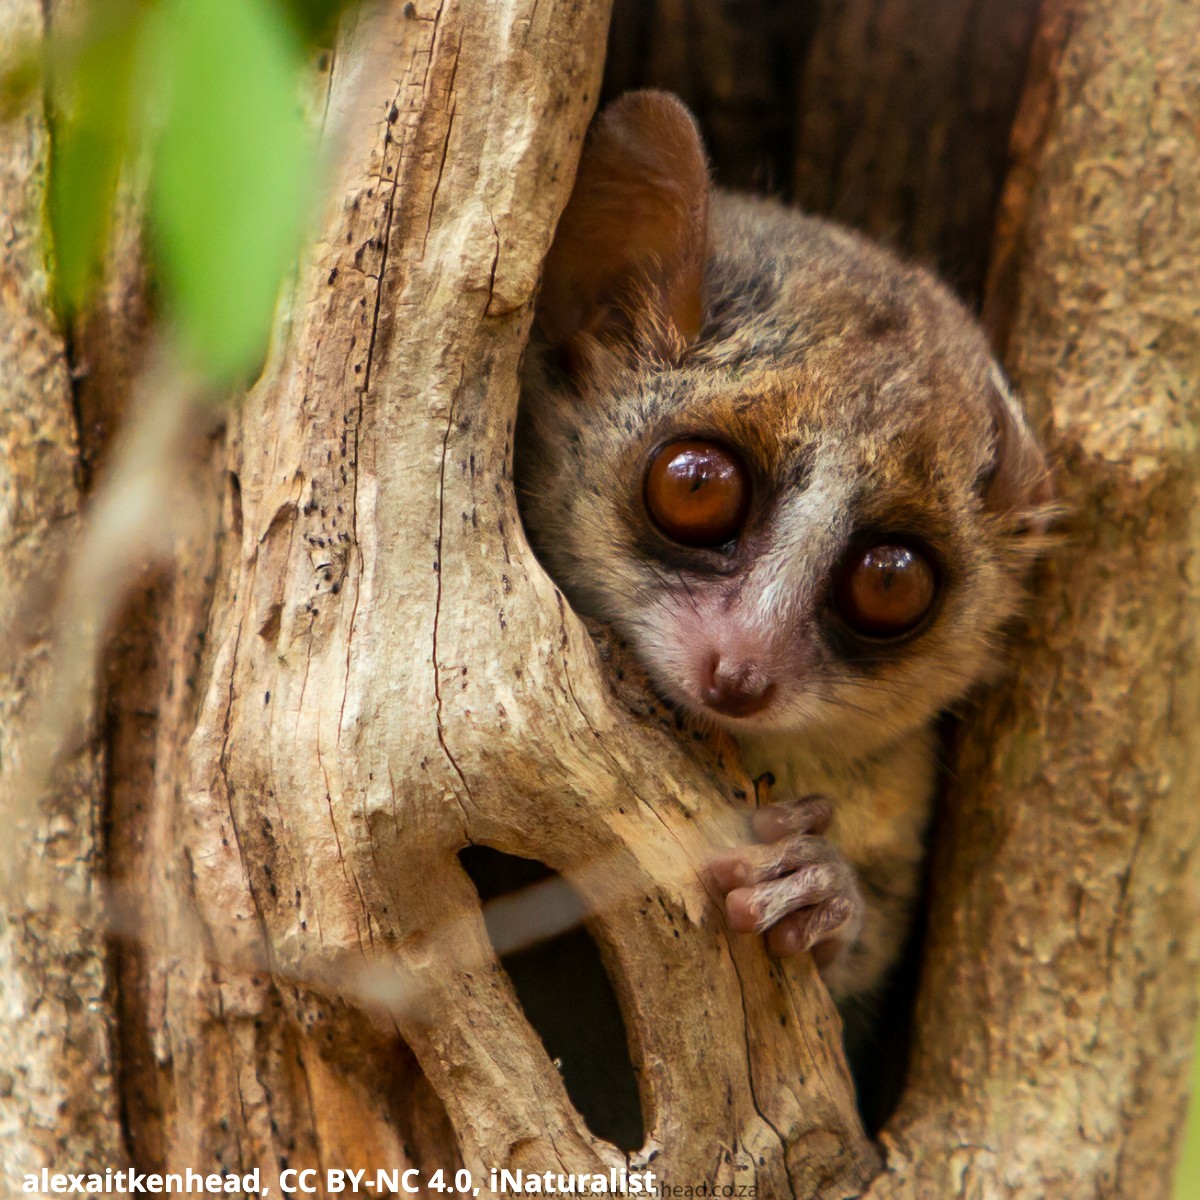 Meet the gray mouse lemur! It’s one of the smallest primates alive today, with a body size of ~5 in (13 cm) long & an average weight of ~2 oz (28 g). This member of the Microcebus genus inhabits Madagascar. The nocturnal critter feeds on plants, insects, & small invertebrates.